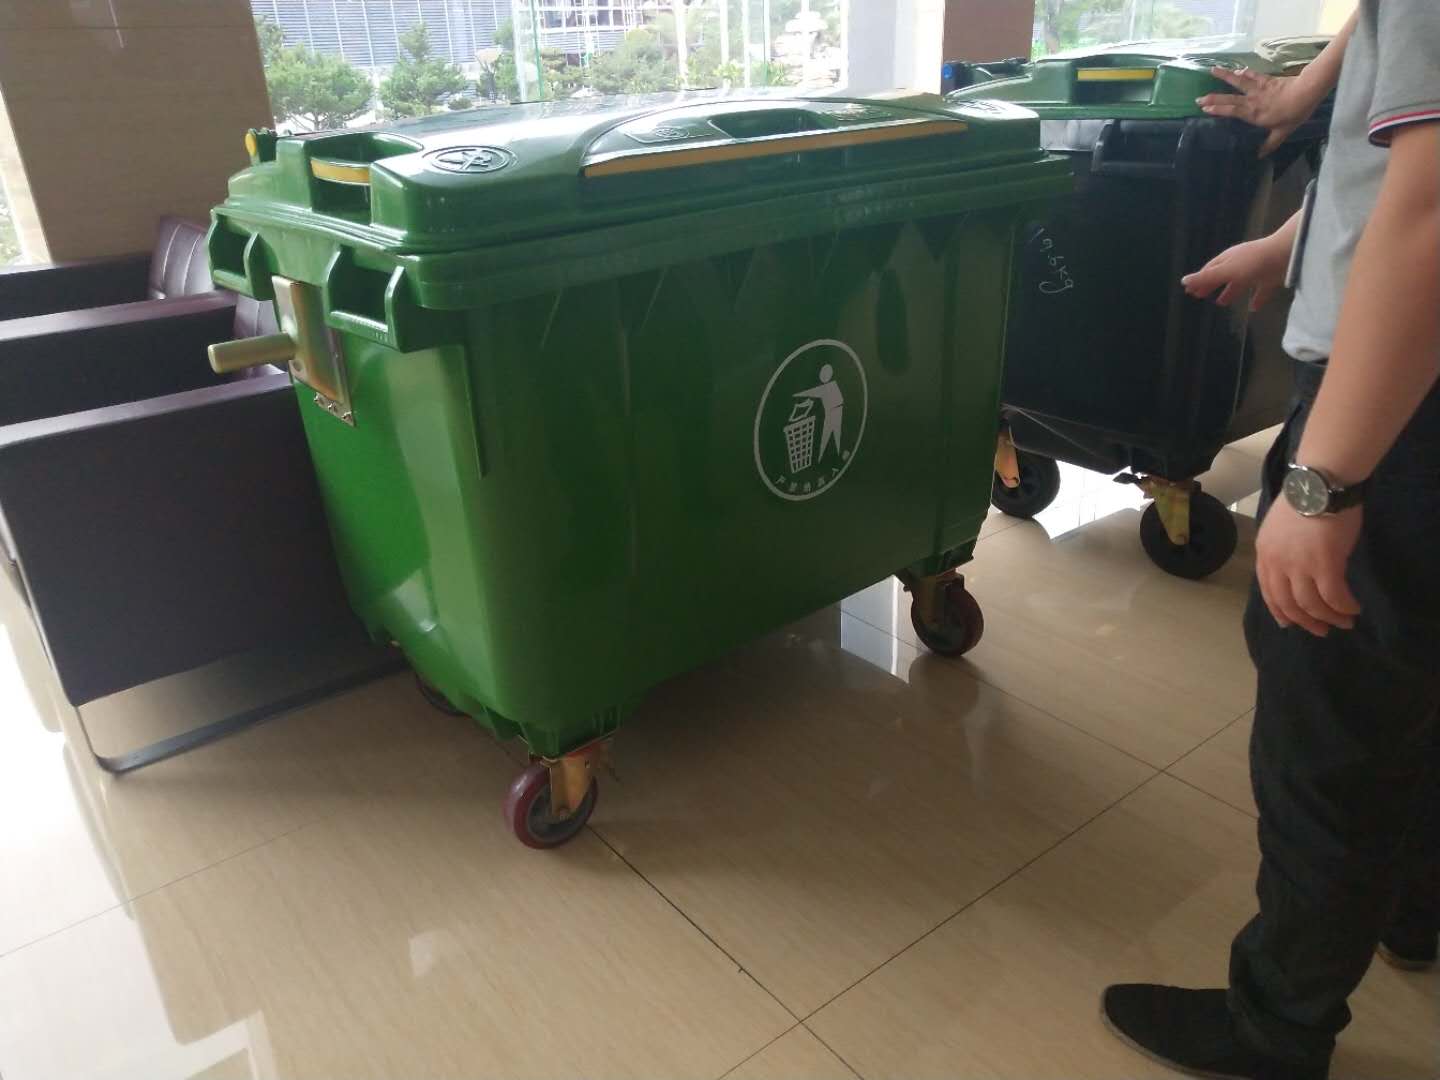 Outdoor Plastic 500L Trash Can With Wheels - Buy trash can, garbage can,  recycle bins Product on Chinese provider of commercial and industrial grade  plastic pallets and material handling containers for the